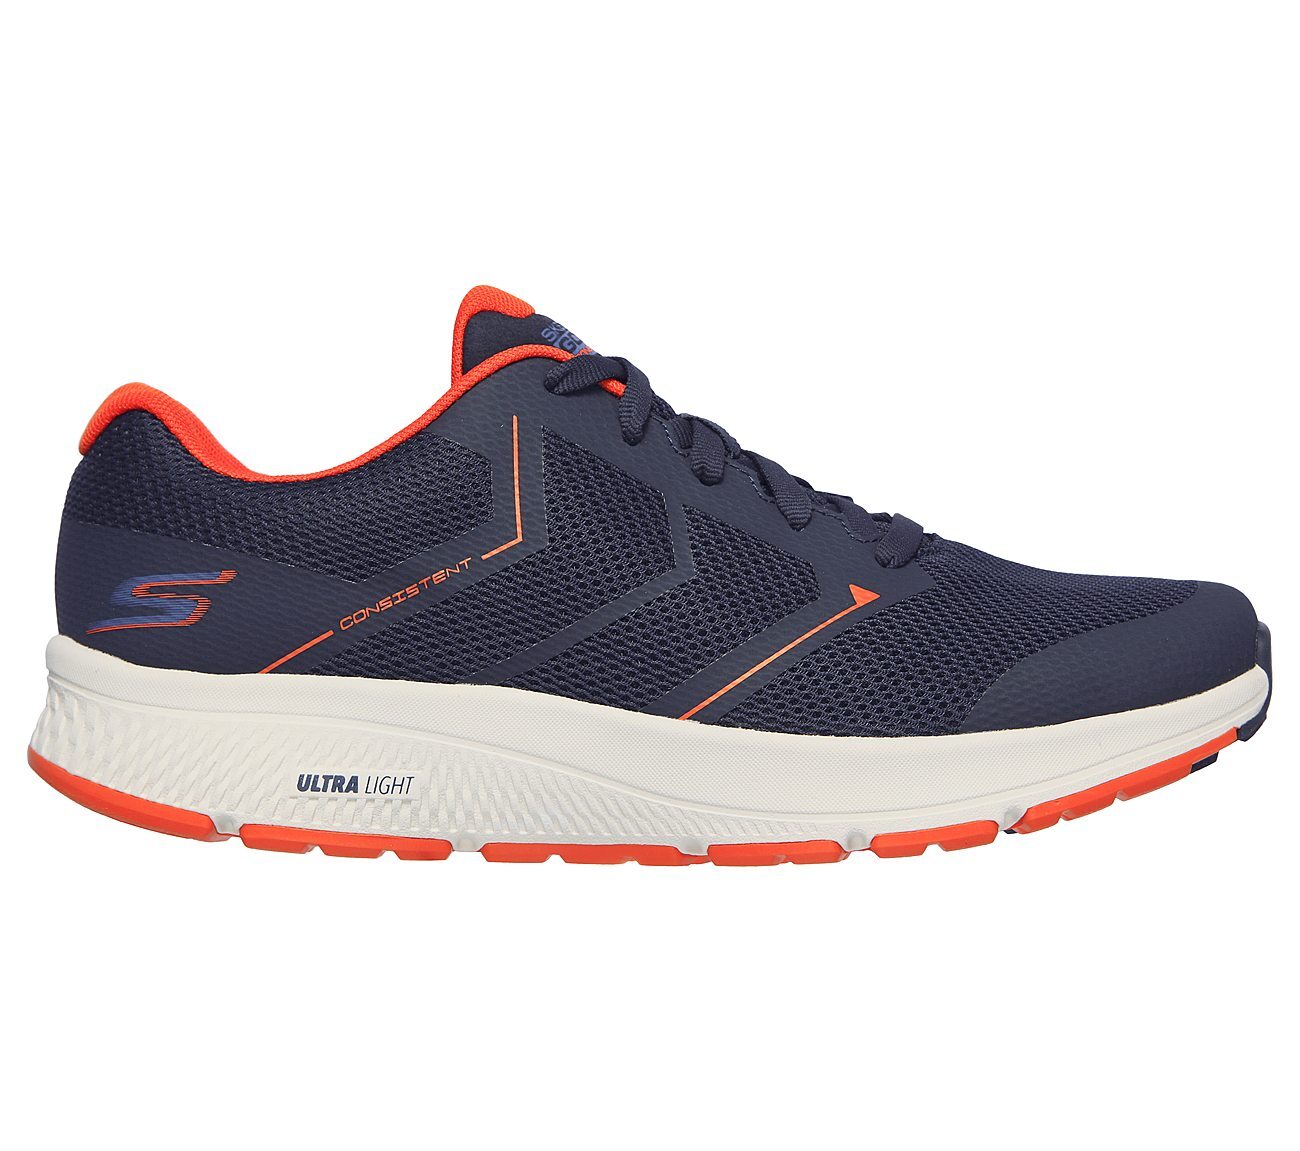 GO RUN CONSISTENT - TRACEUR, NAVY/ORANGE Footwear Lateral View